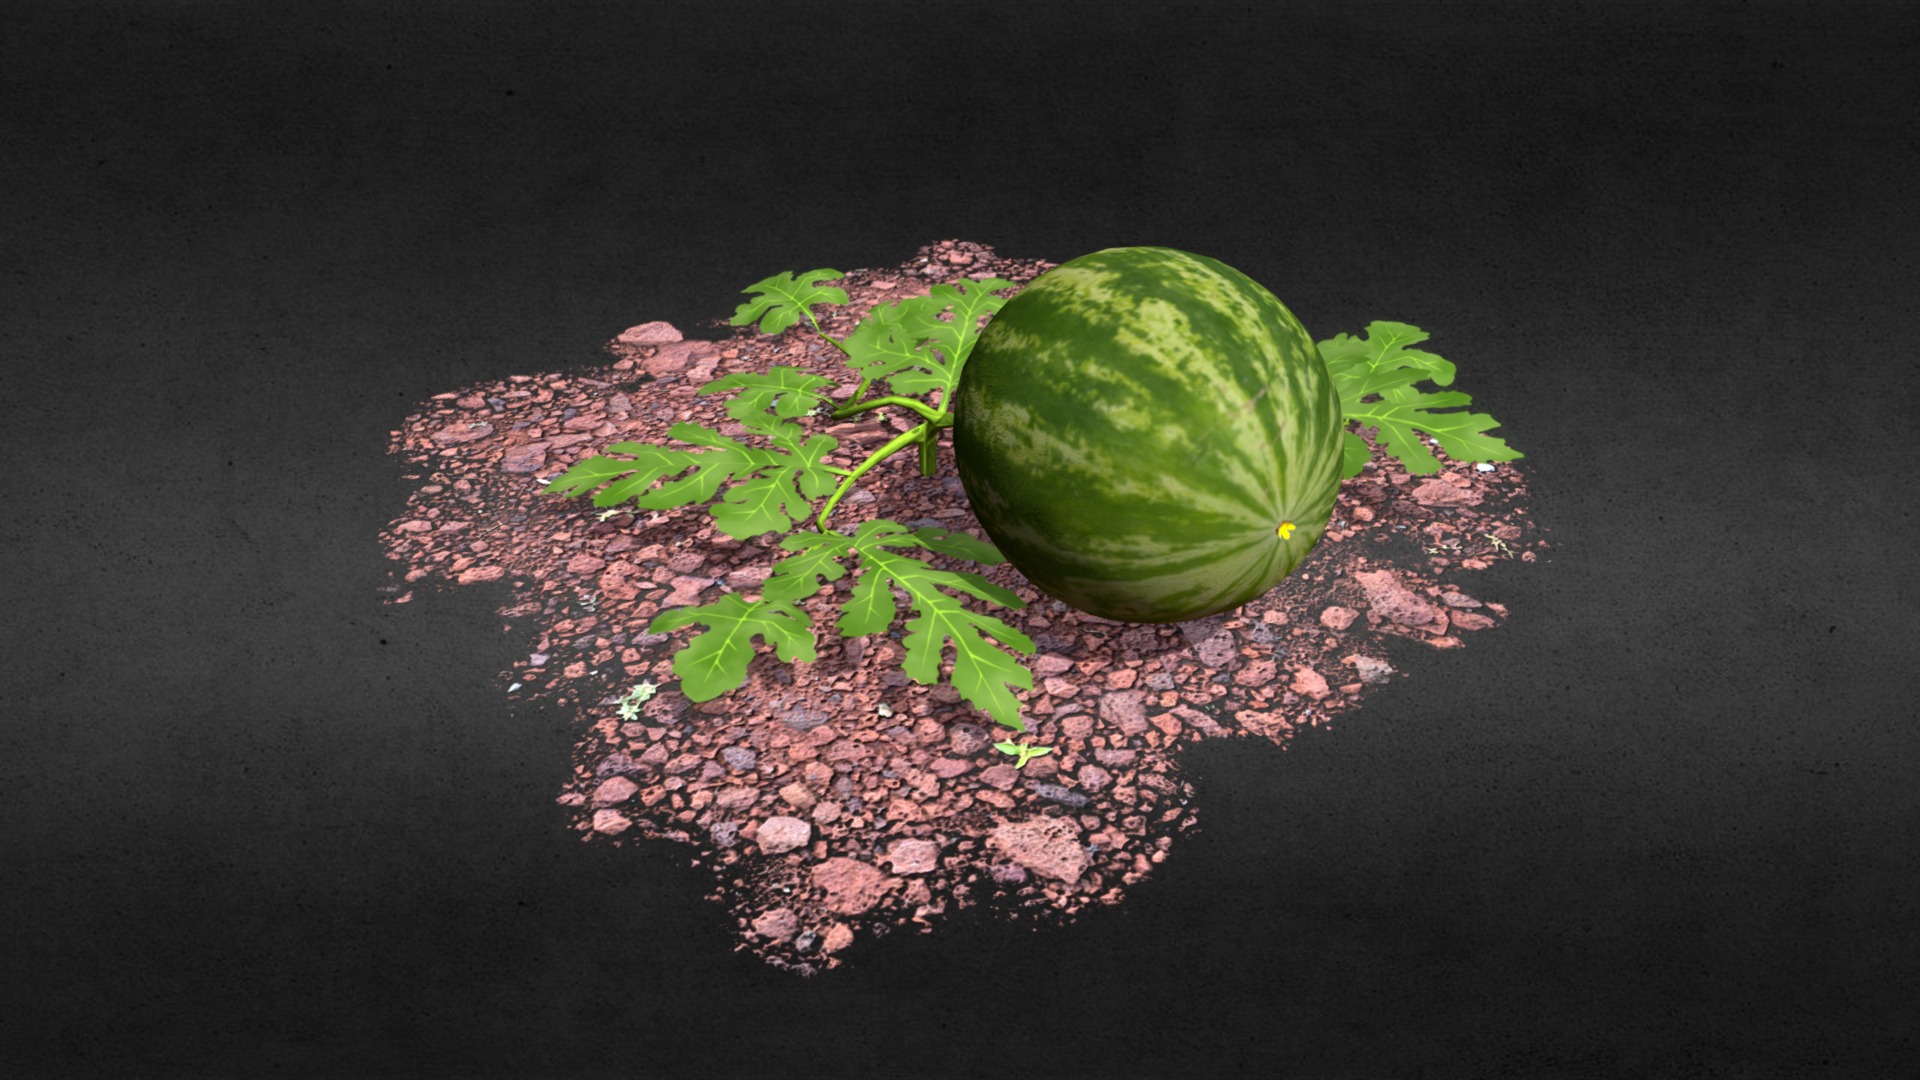 3D model Watermelon - This is a 3D model of the Watermelon. The 3D model is about a watermelon on a black surface.